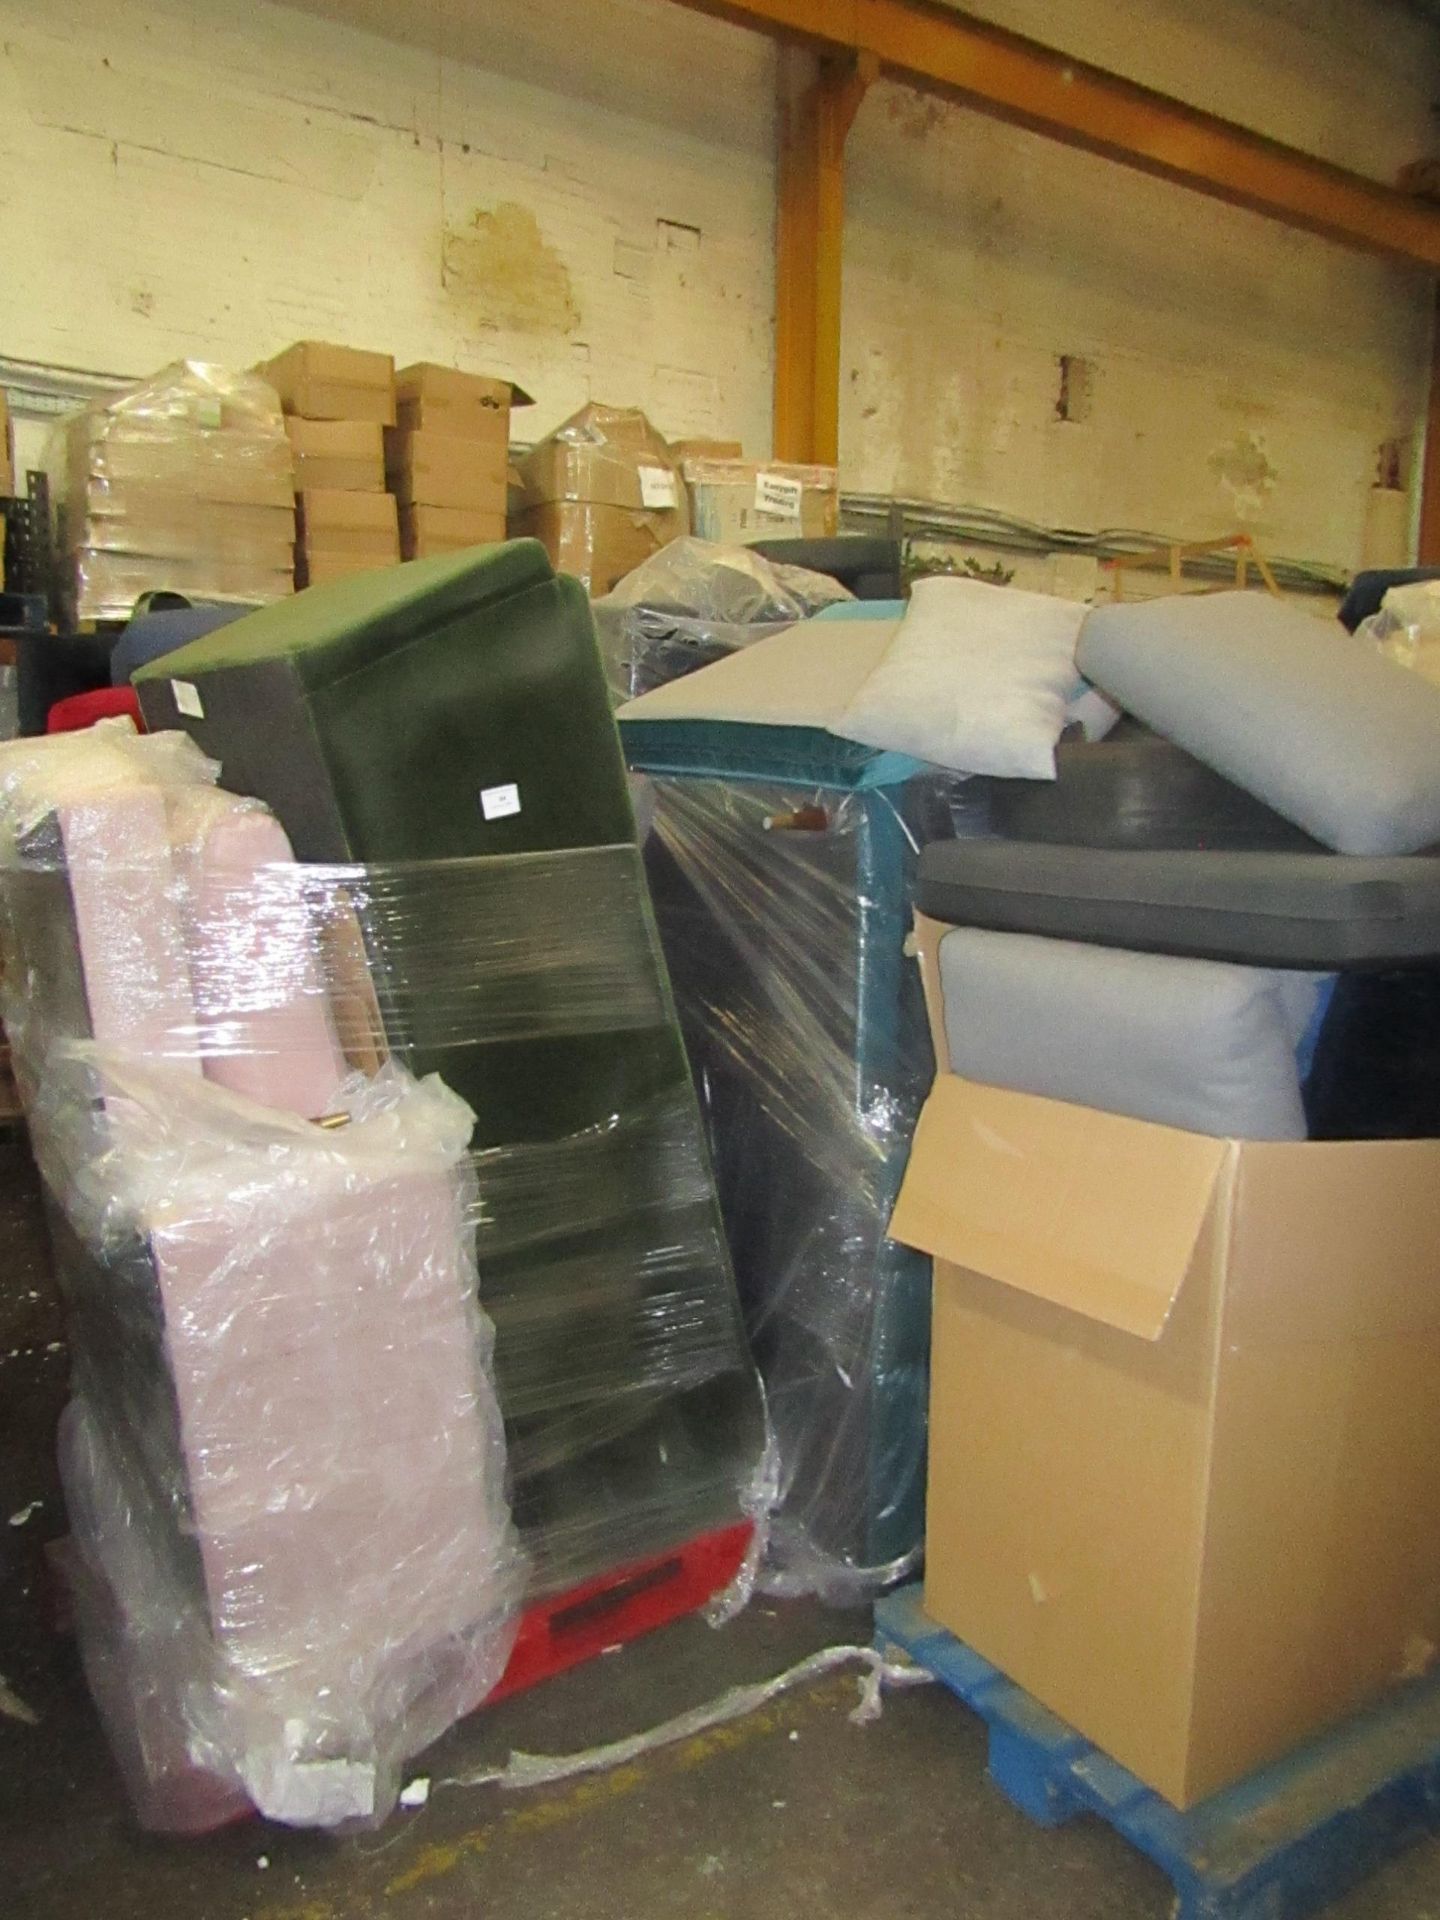 | 9X | PALLETS OF SWOON B.E.R FURNITURE AND SOFAS, ALL CUSTOMER RETURNS UNCHECKED FOR THE EXTENT